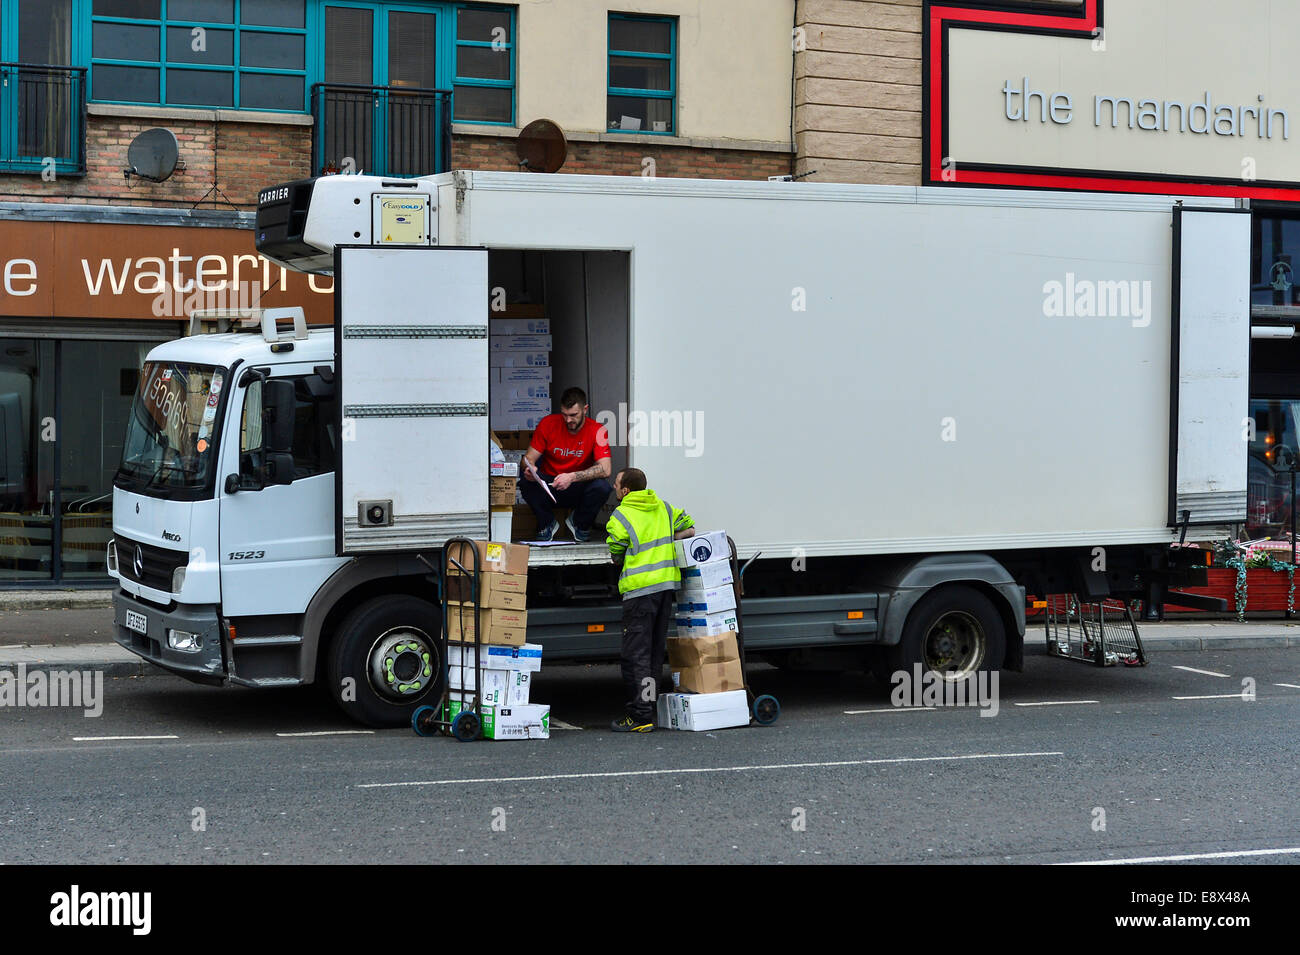 Stock Photo - Lorry delivering food supplies to Chinese restaurant, Derry, Londonderry, Northern Ireland. ©George Sweeney /Alamy Stock Photo